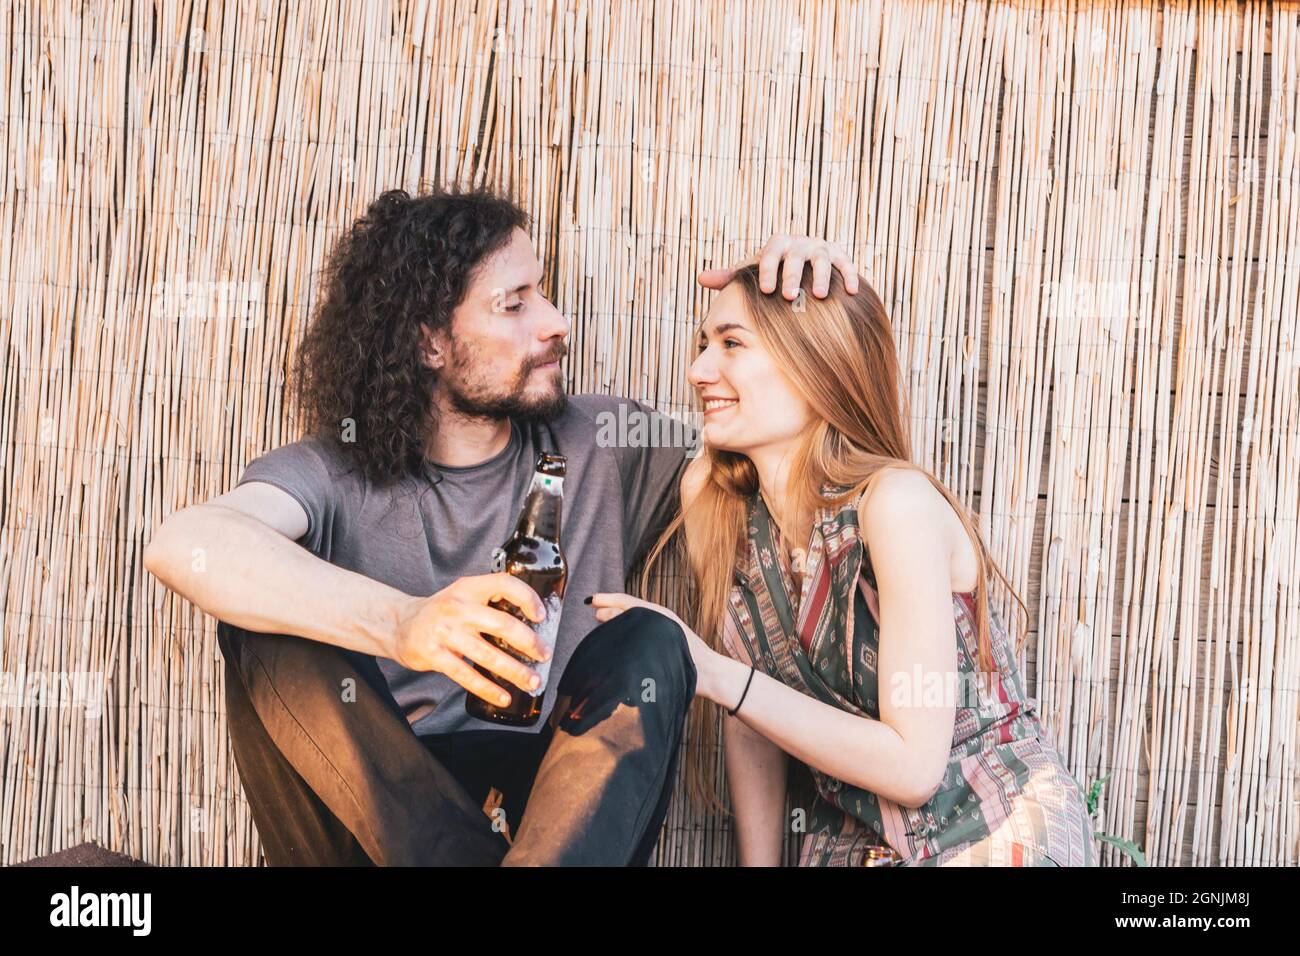 Young hipster couple sitting on the ground in a bar with afternoon light while drinking beer. Love and affection concept Stock Photo